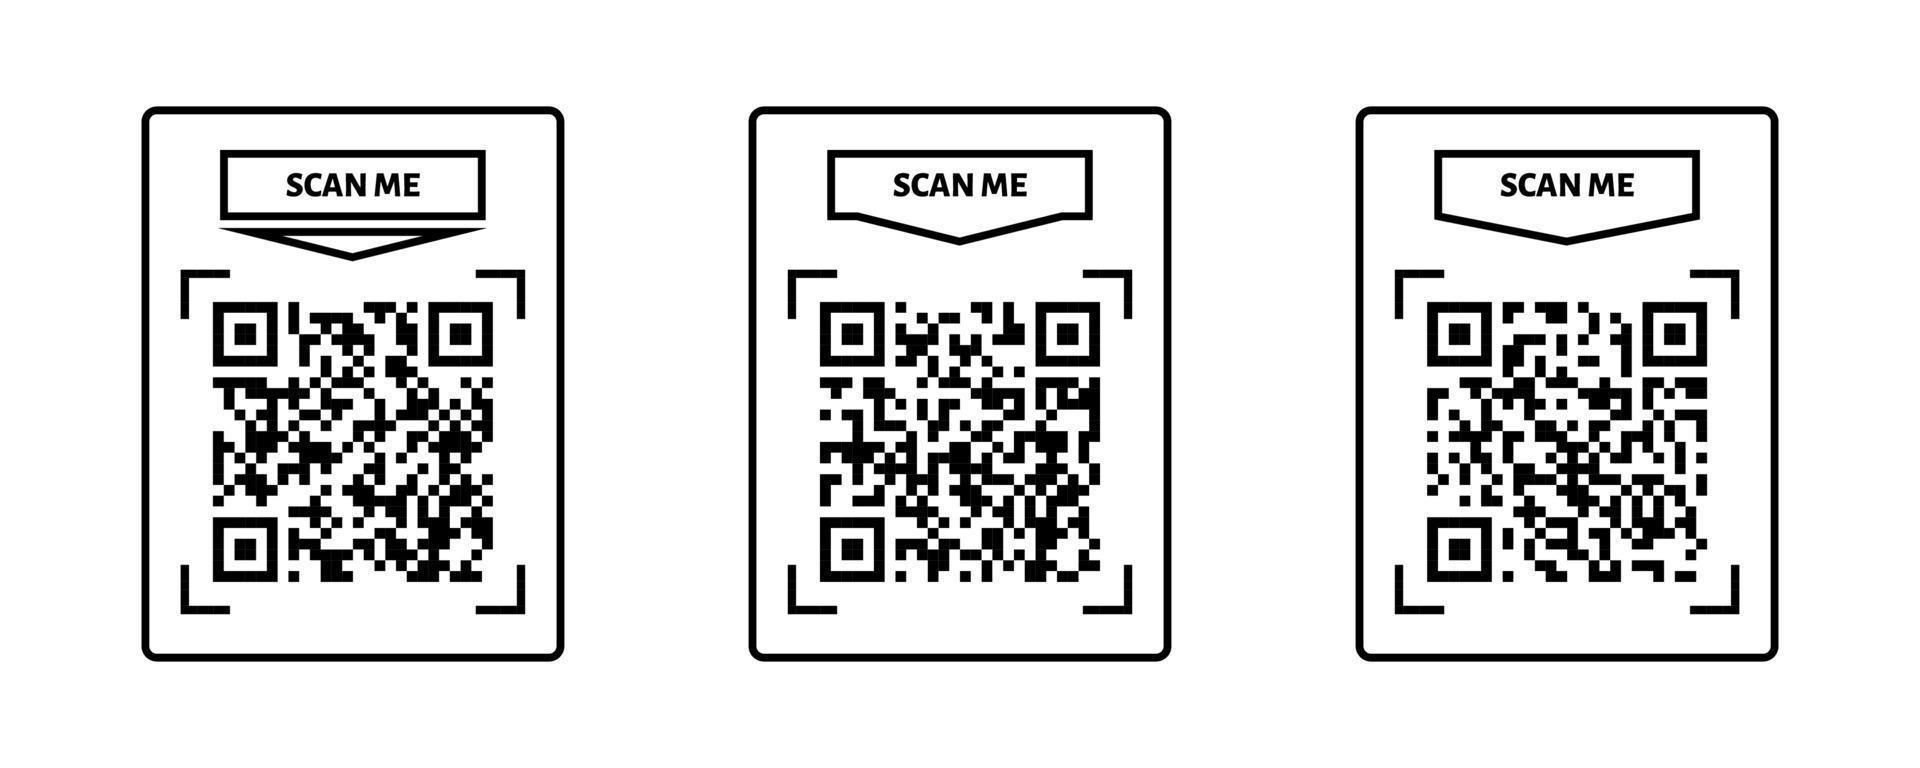 Scan me QR code frame. QR code for payment, text transfer with scan me button. Vector illustration